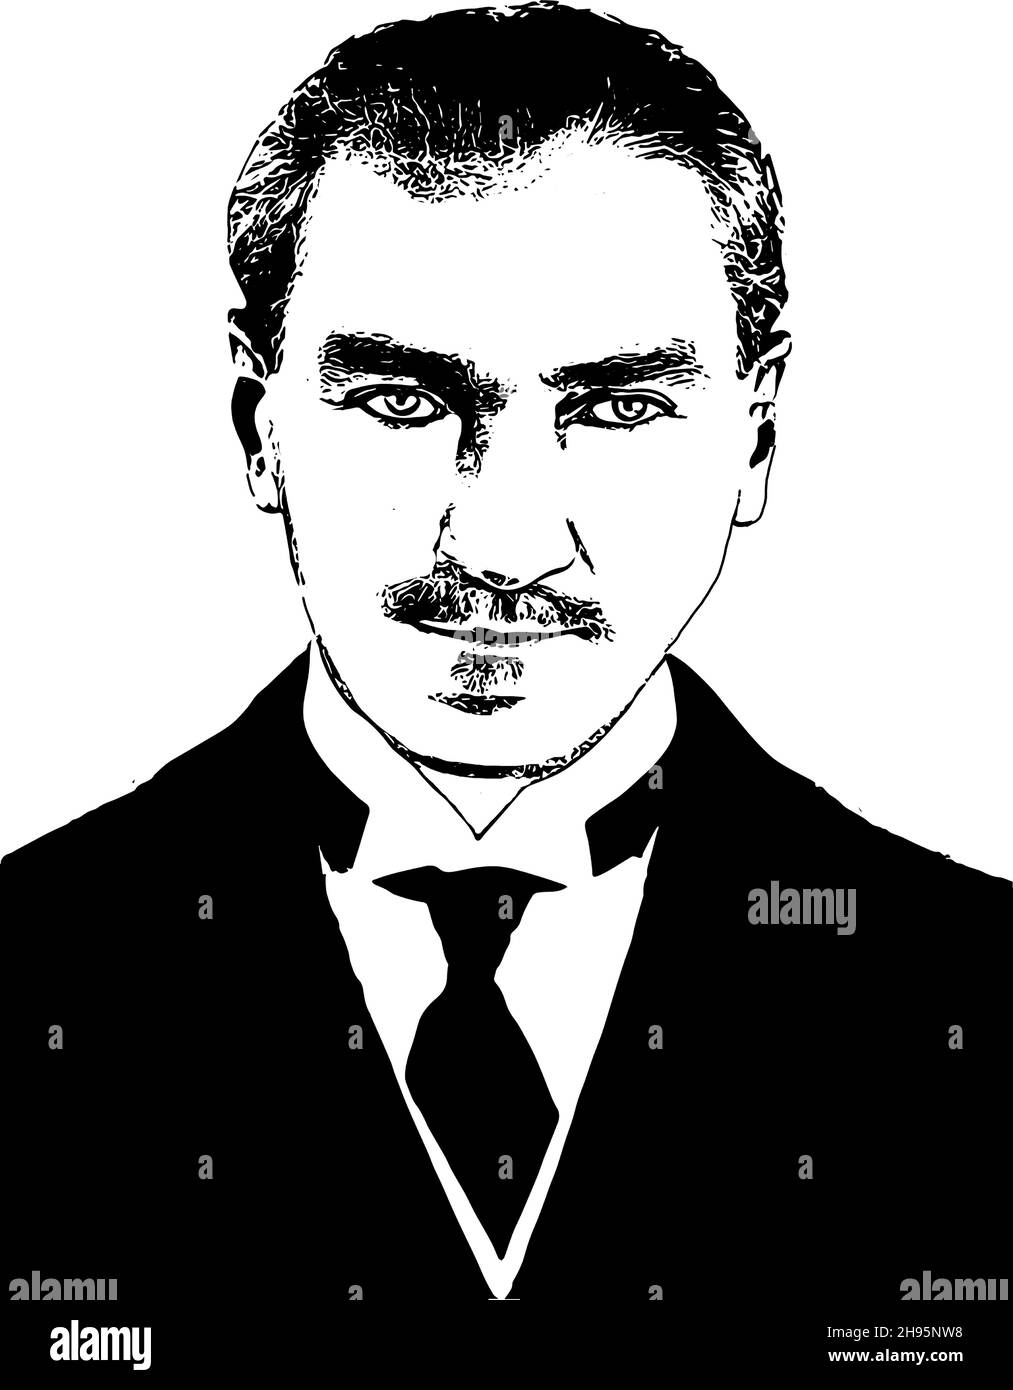 Young Mustafa Kemal Ataturk vector illustration. He is the founder of modern Republic of Turkey. Stock Vector